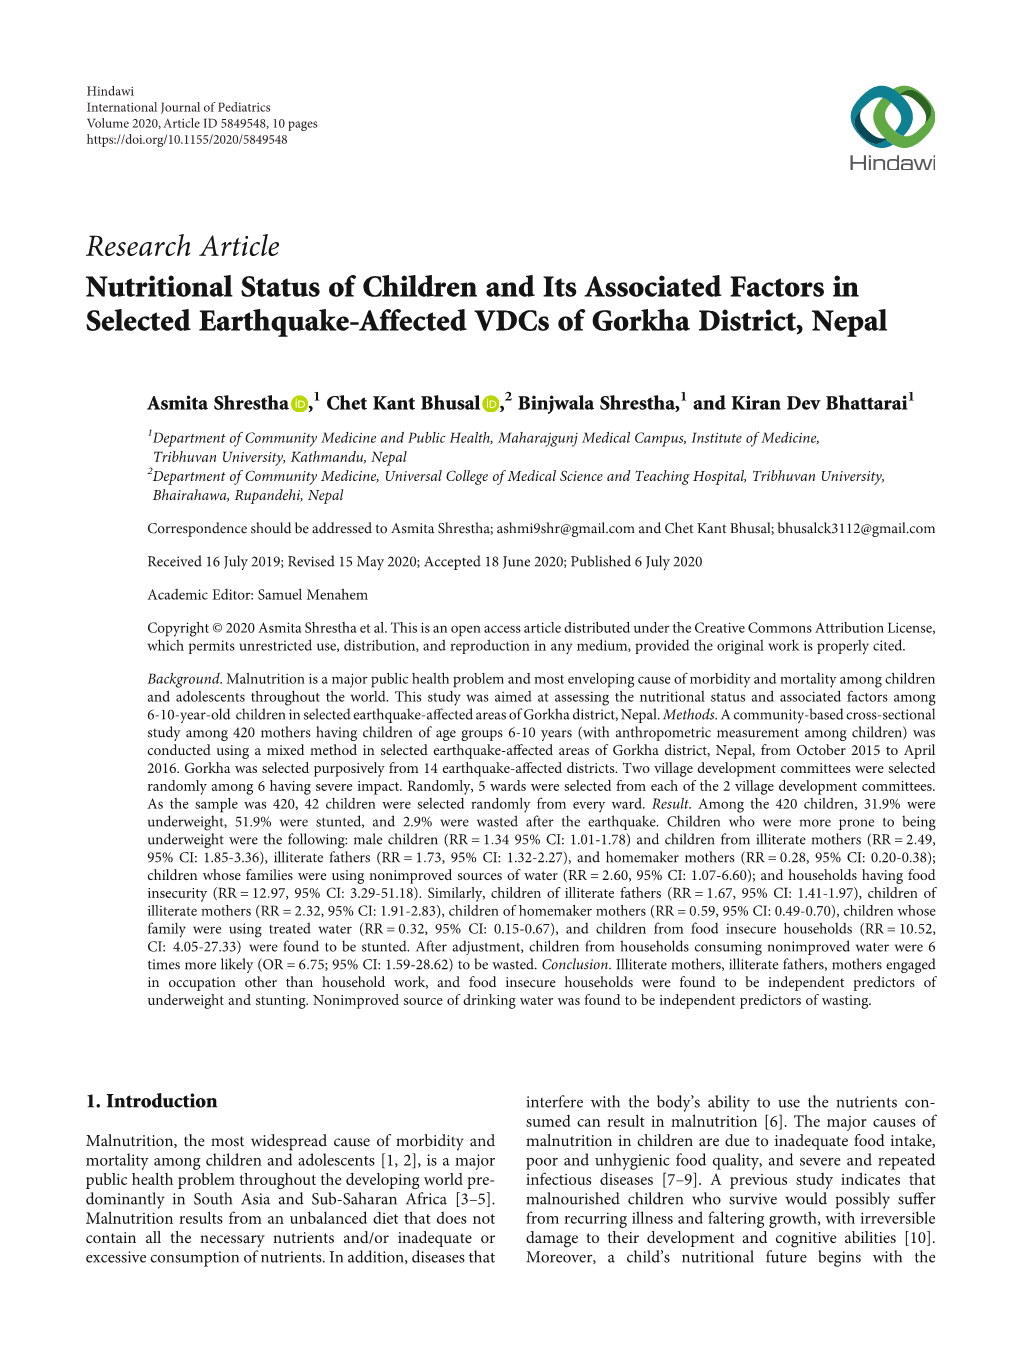 Nutritional Status of Children and Its Associated Factors in Selected Earthquake-Affected Vdcs of Gorkha District, Nepal